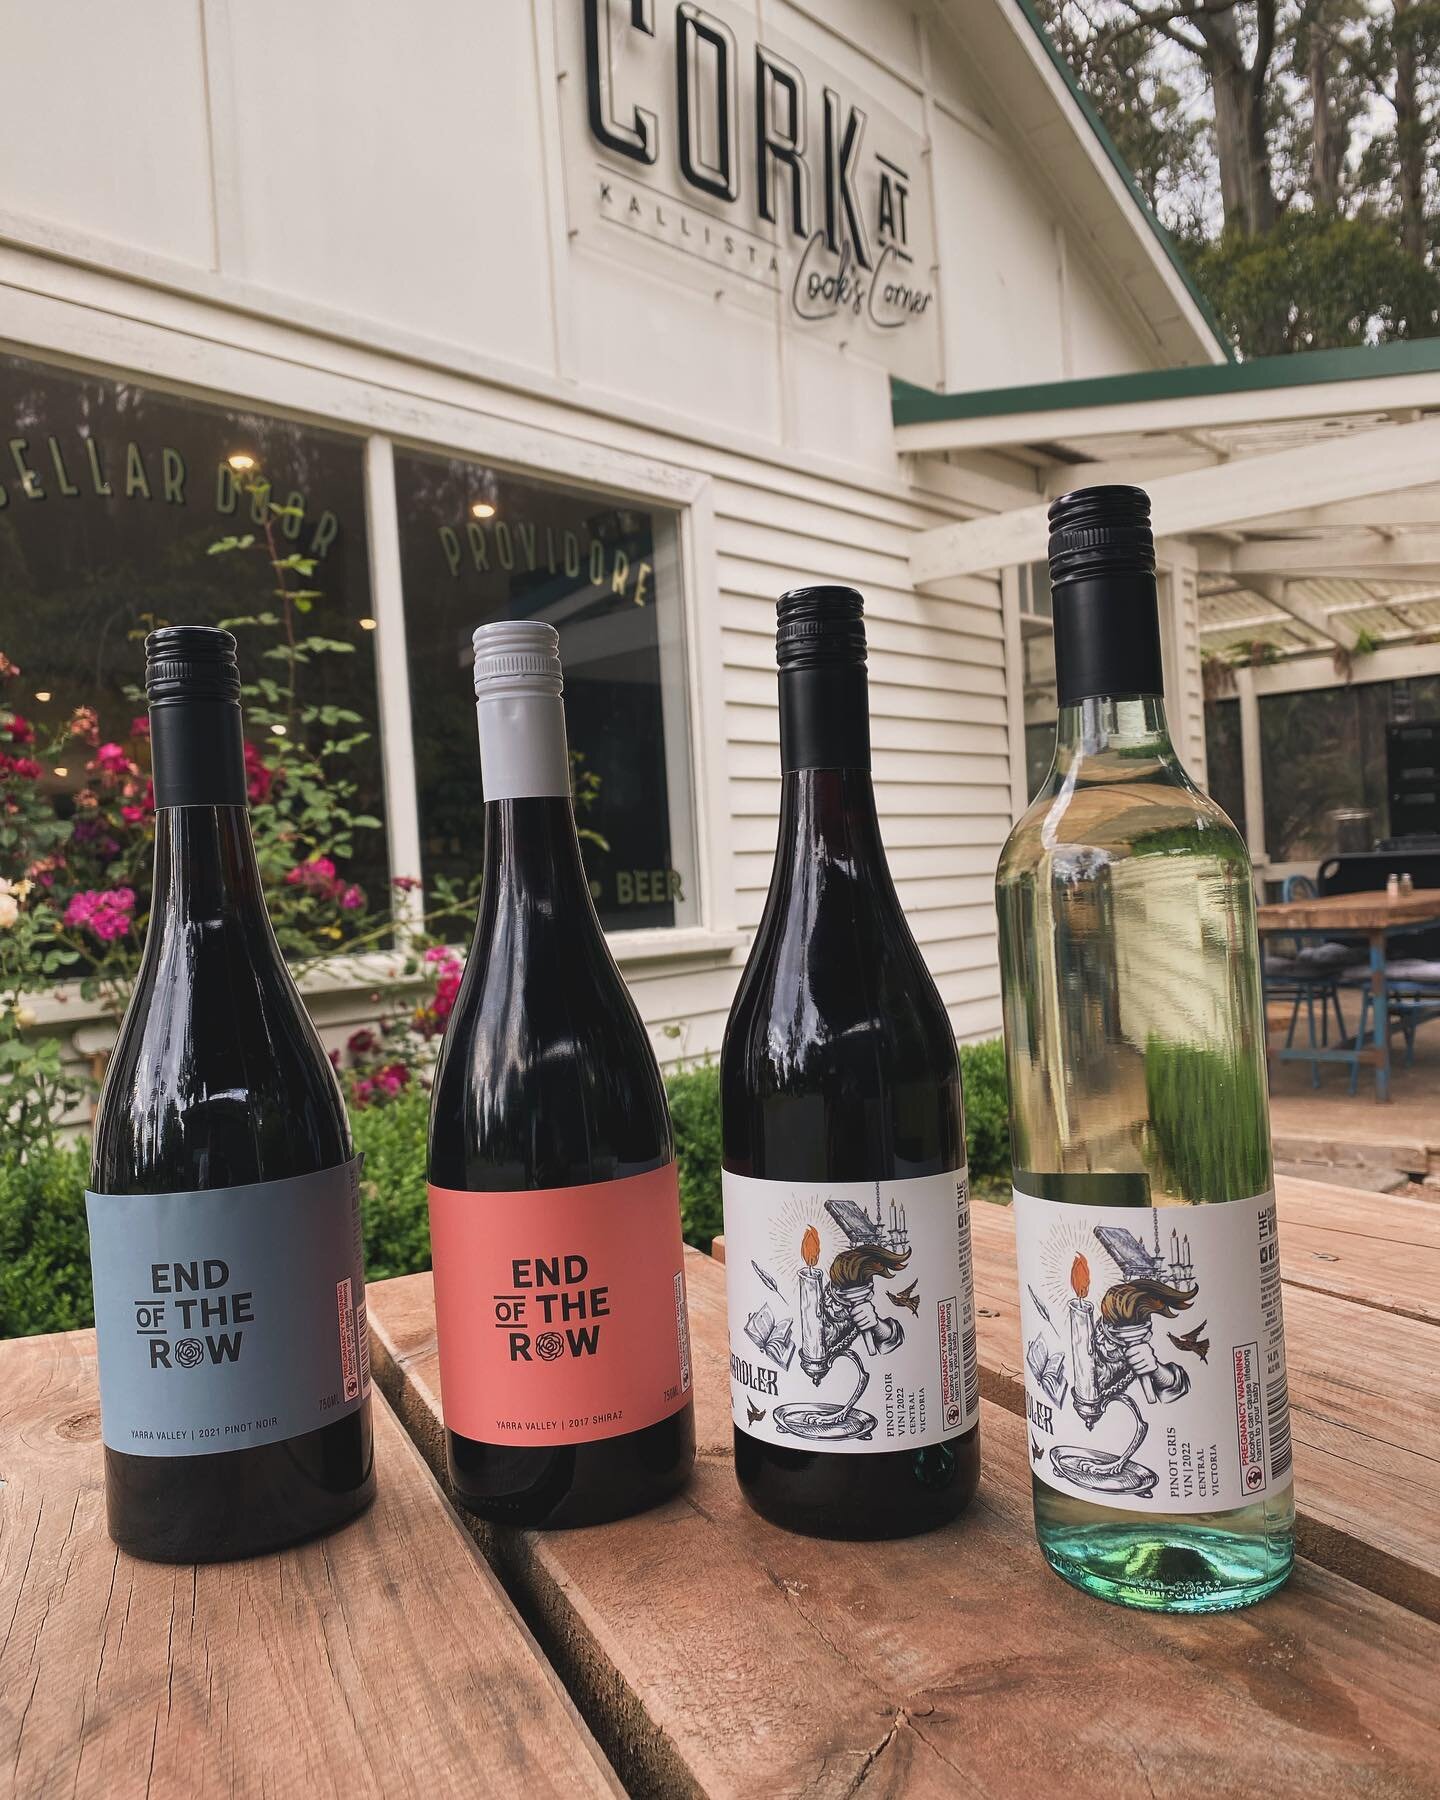 Our new Yarra Valley Pinot and Shiraz have just arrived alongside our new Chandler Pinot Gris and Pinot Noir come along tonight for a FREE WINE TASTING! 4-7pm #wine #winetasting #freewinetasting #yarravalley #fridaynight #fridaynightdrinks #beerontap